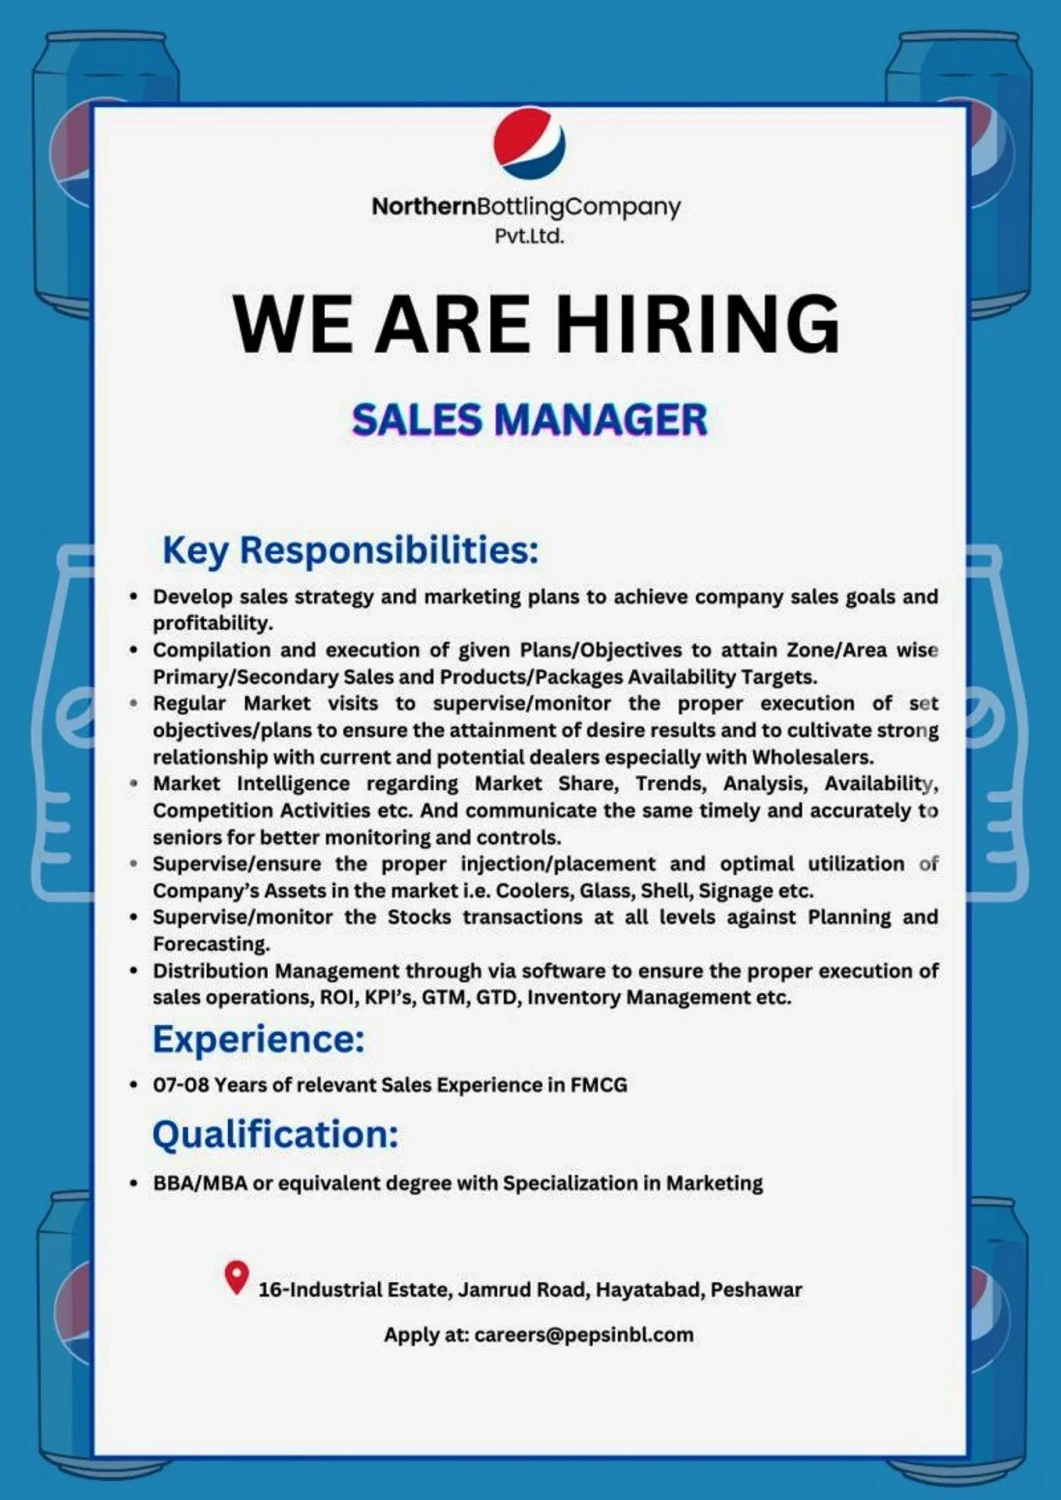 Exciting Opportunity at Northern Bottling Company 